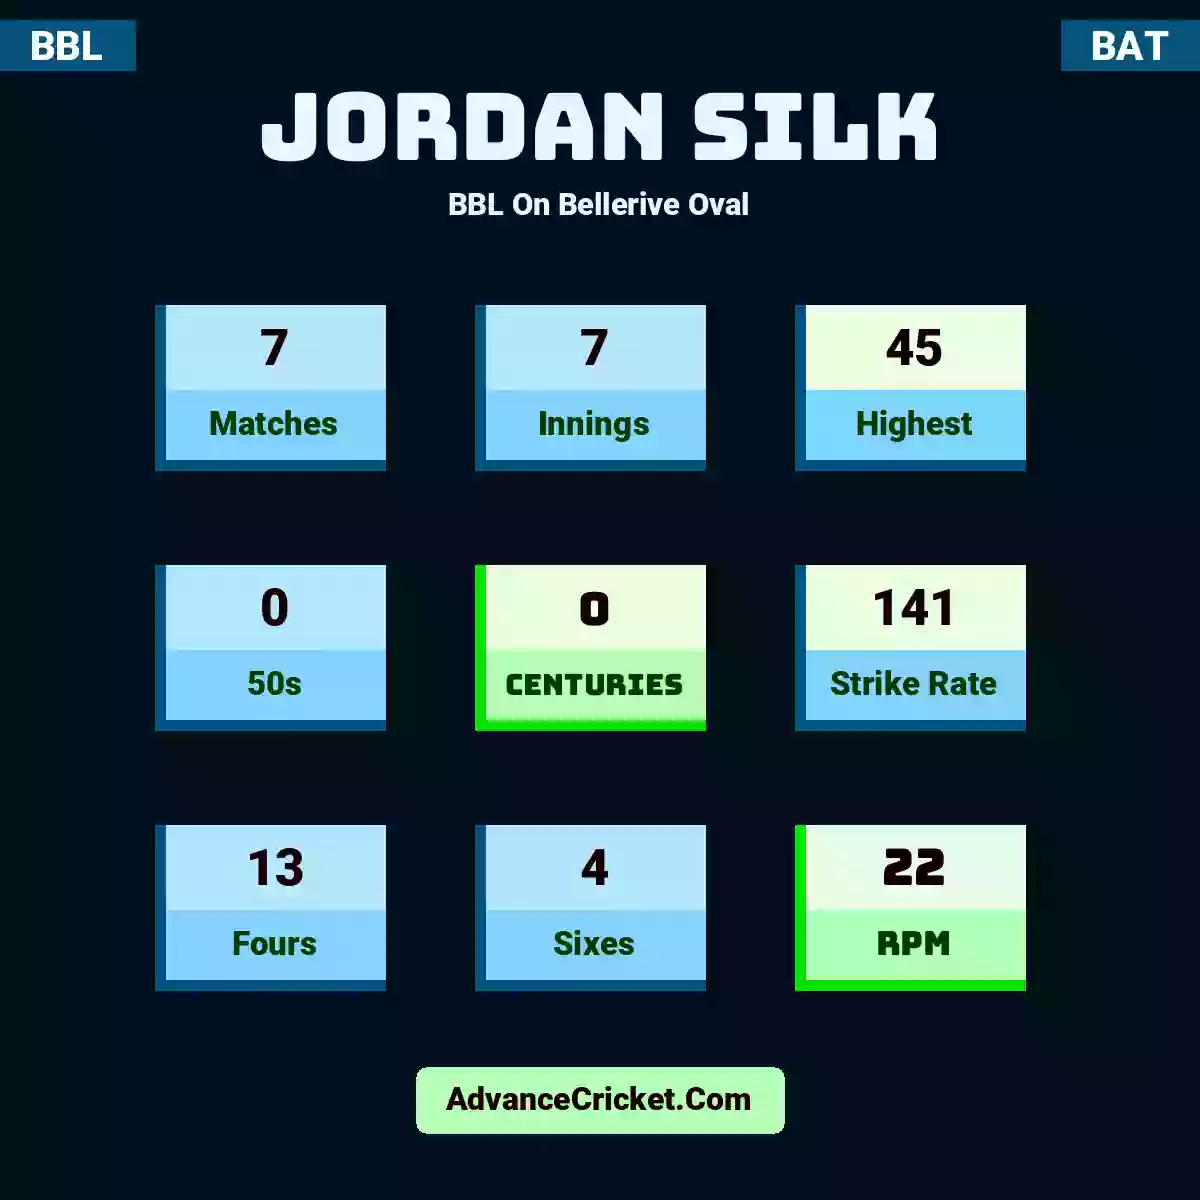 Jordan Silk BBL  On Bellerive Oval, Jordan Silk played 7 matches, scored 45 runs as highest, 0 half-centuries, and 0 centuries, with a strike rate of 141. J.Silk hit 13 fours and 4 sixes, with an RPM of 22.